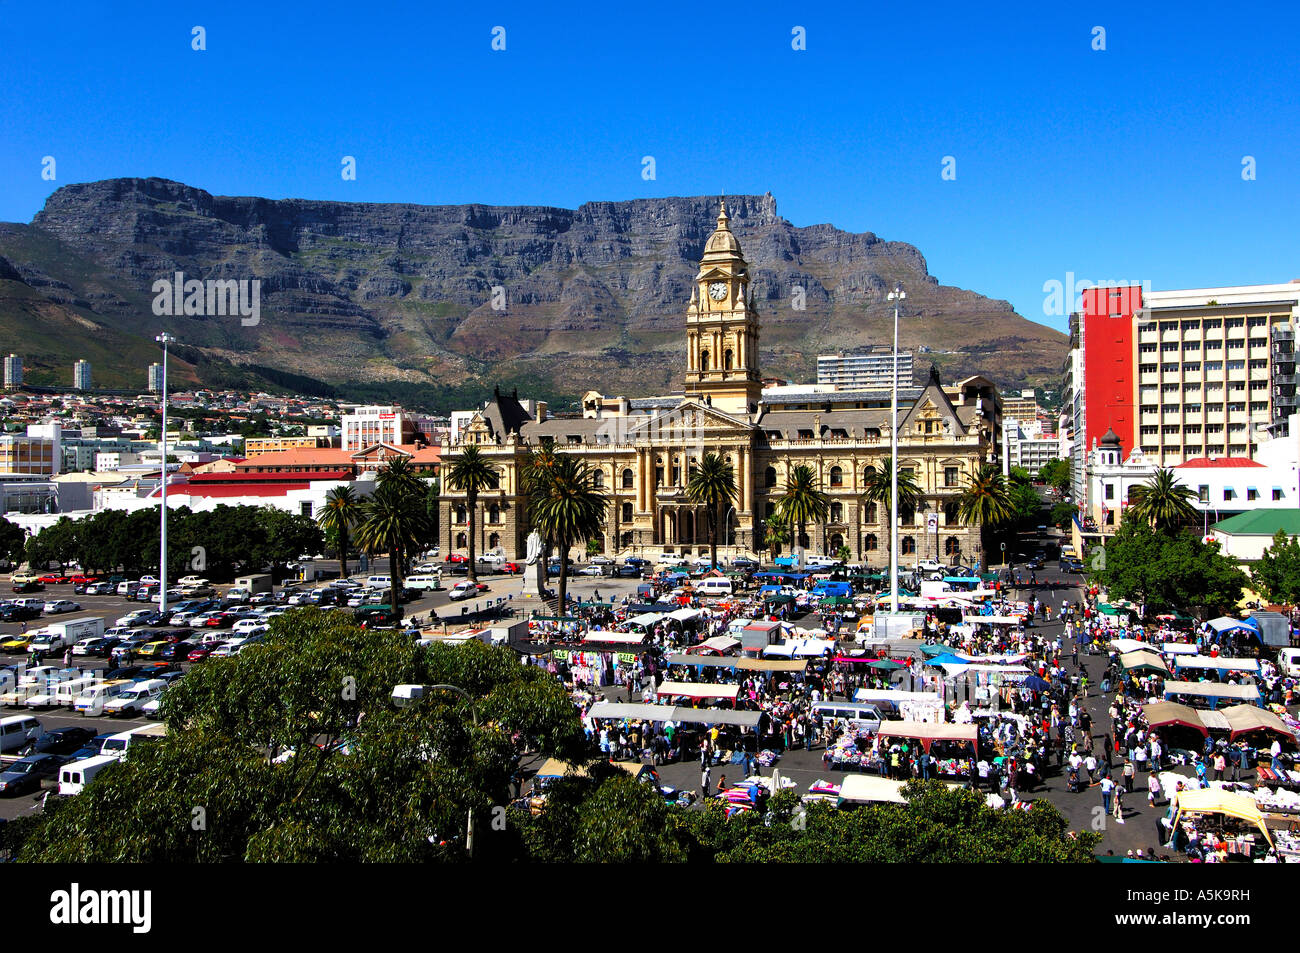 City hall, market day on Grand Parade square, Table Mountain, Cape Town, South Africa Stock Photo